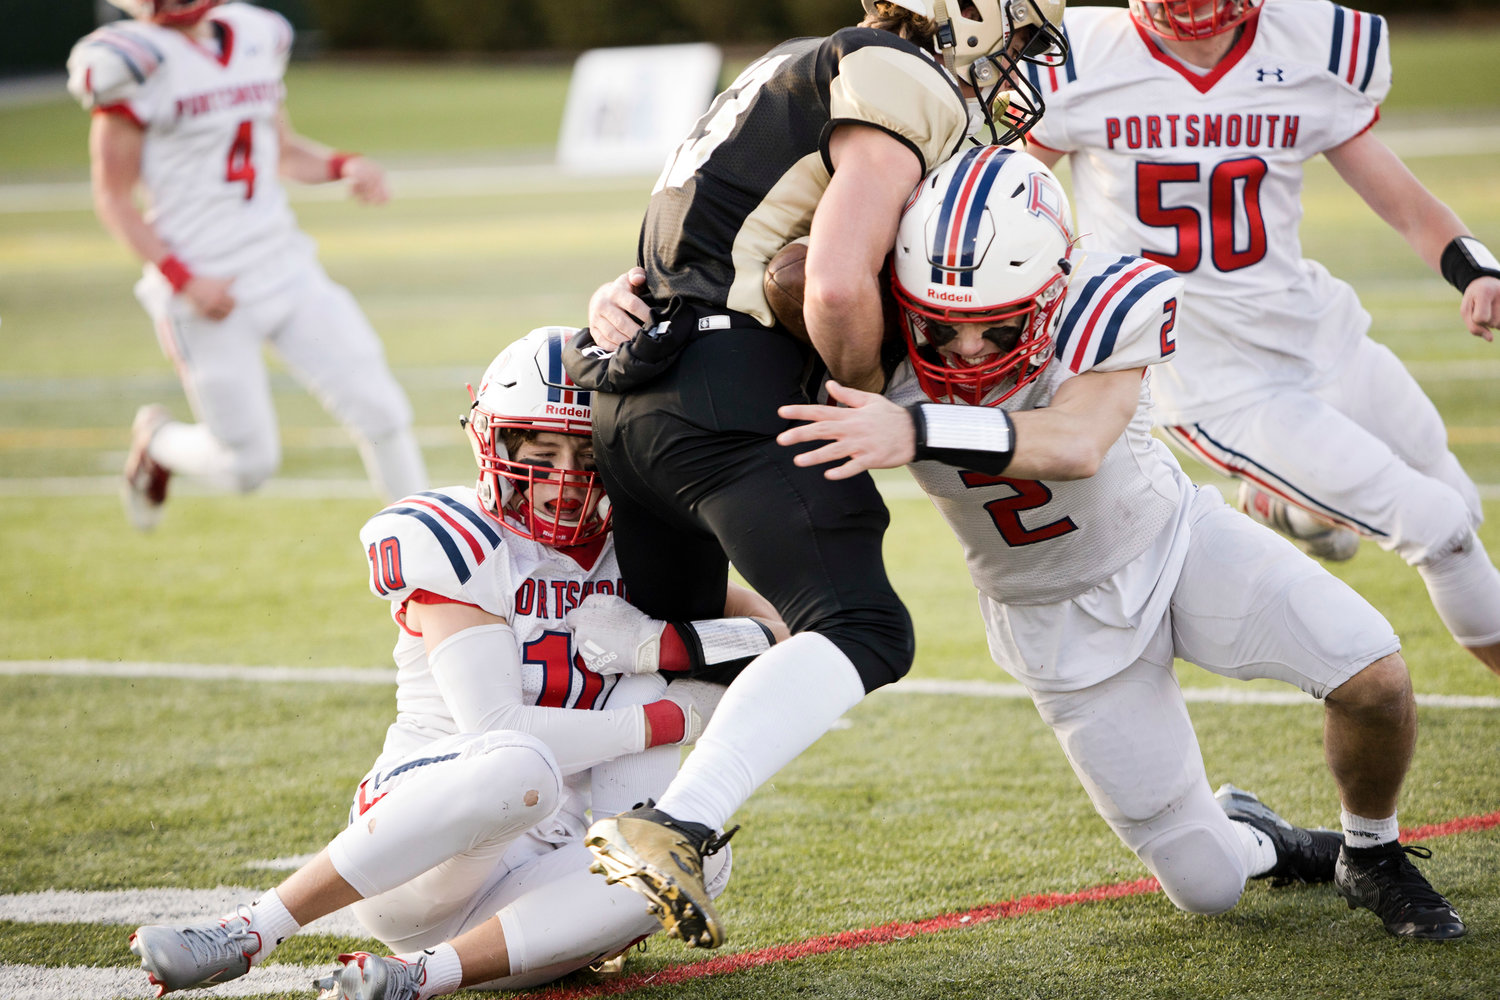 Evan Tullson (left) and Benny Hurd tackle a North Kingstown ball-carrier.